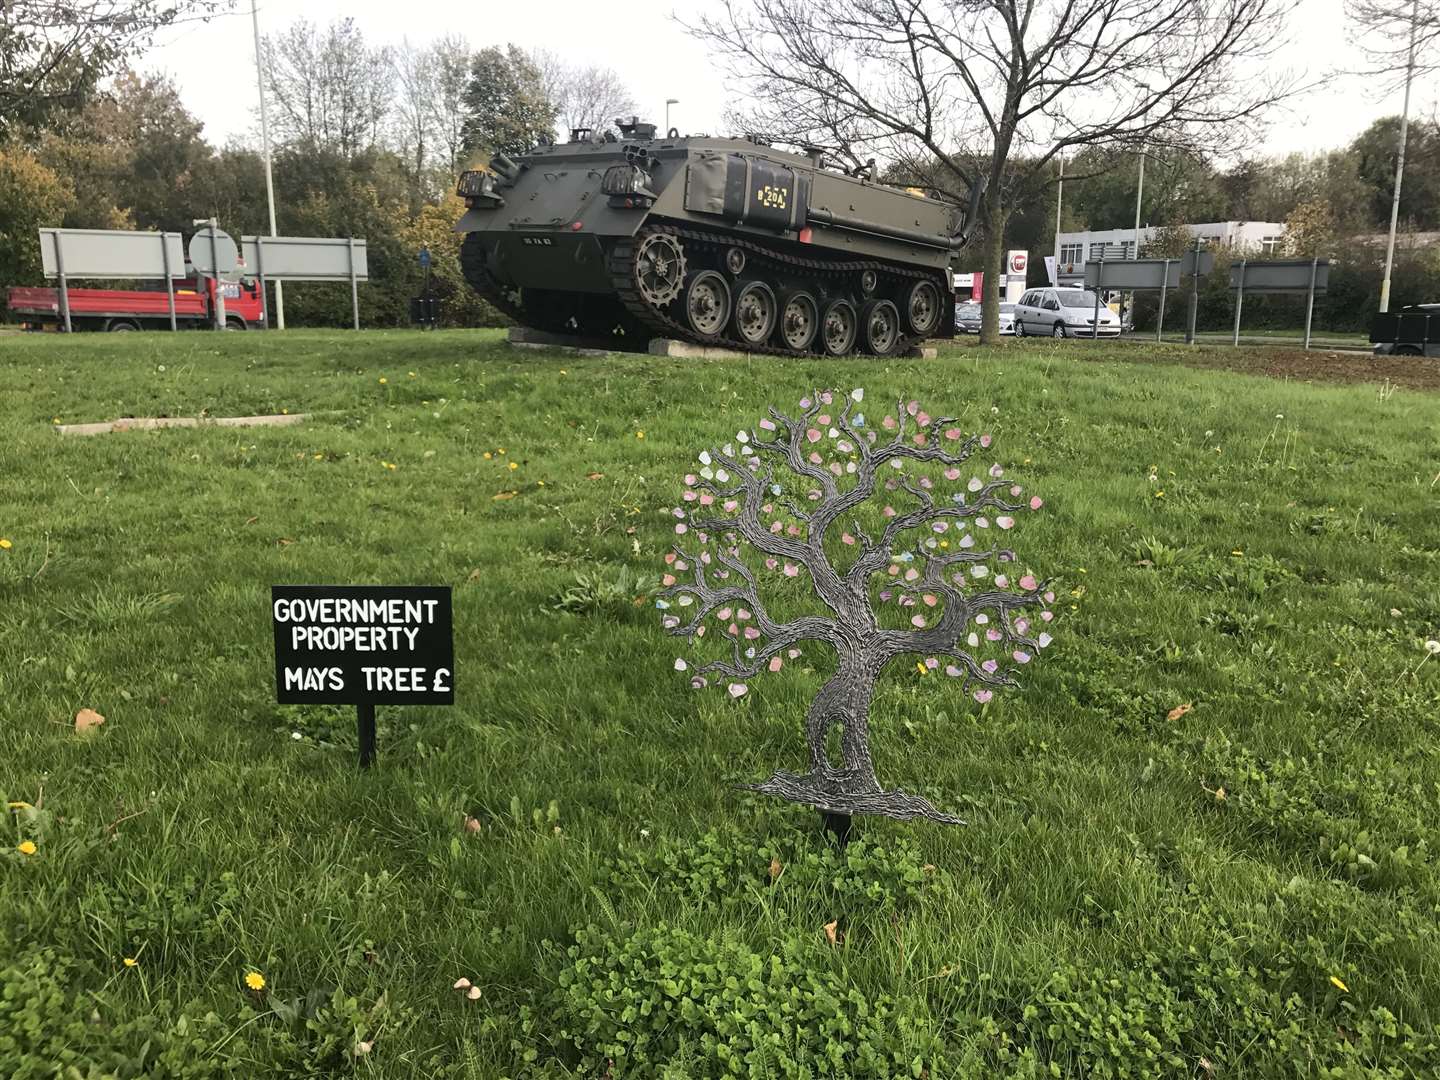 His Tank roundabout sculpture saw a departure from the Brexit theme, and a clue about his identity.